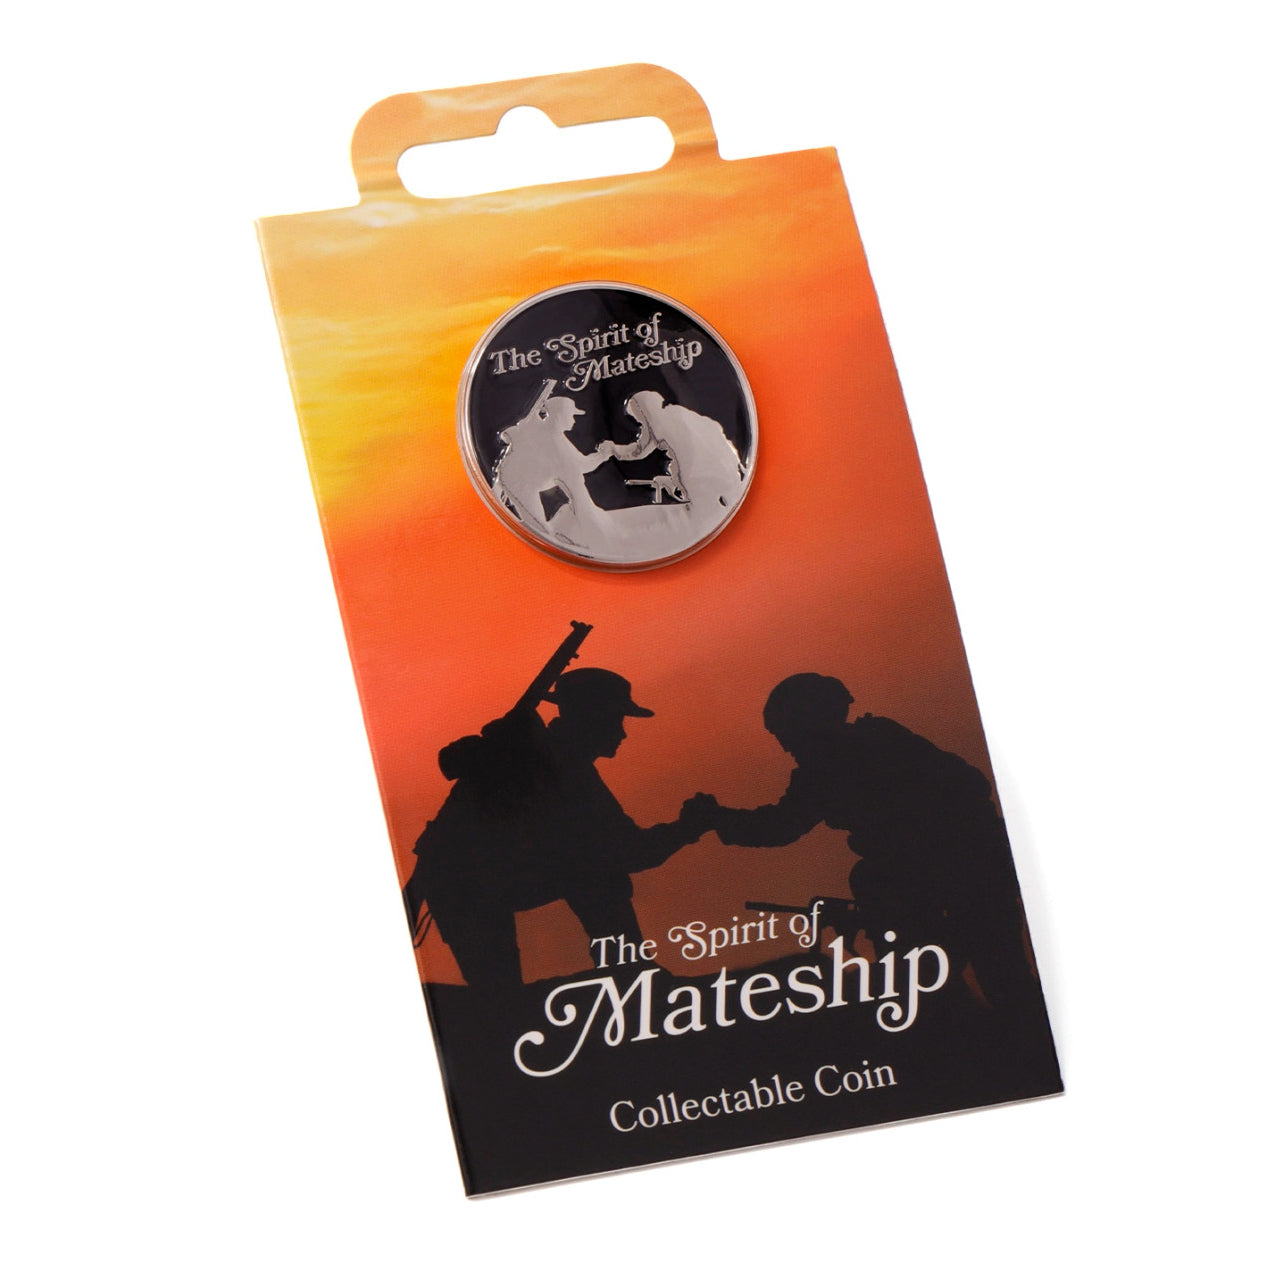 The "Spirit of Mateship Coin in Blister Pack" is a must-have for anyone who wants to celebrate the unwavering bond of mateship and honor the spirit of Australian soldiers. Get yours today and experience the profound connections and enduring strength it represents. www.defenceqstore.com.au